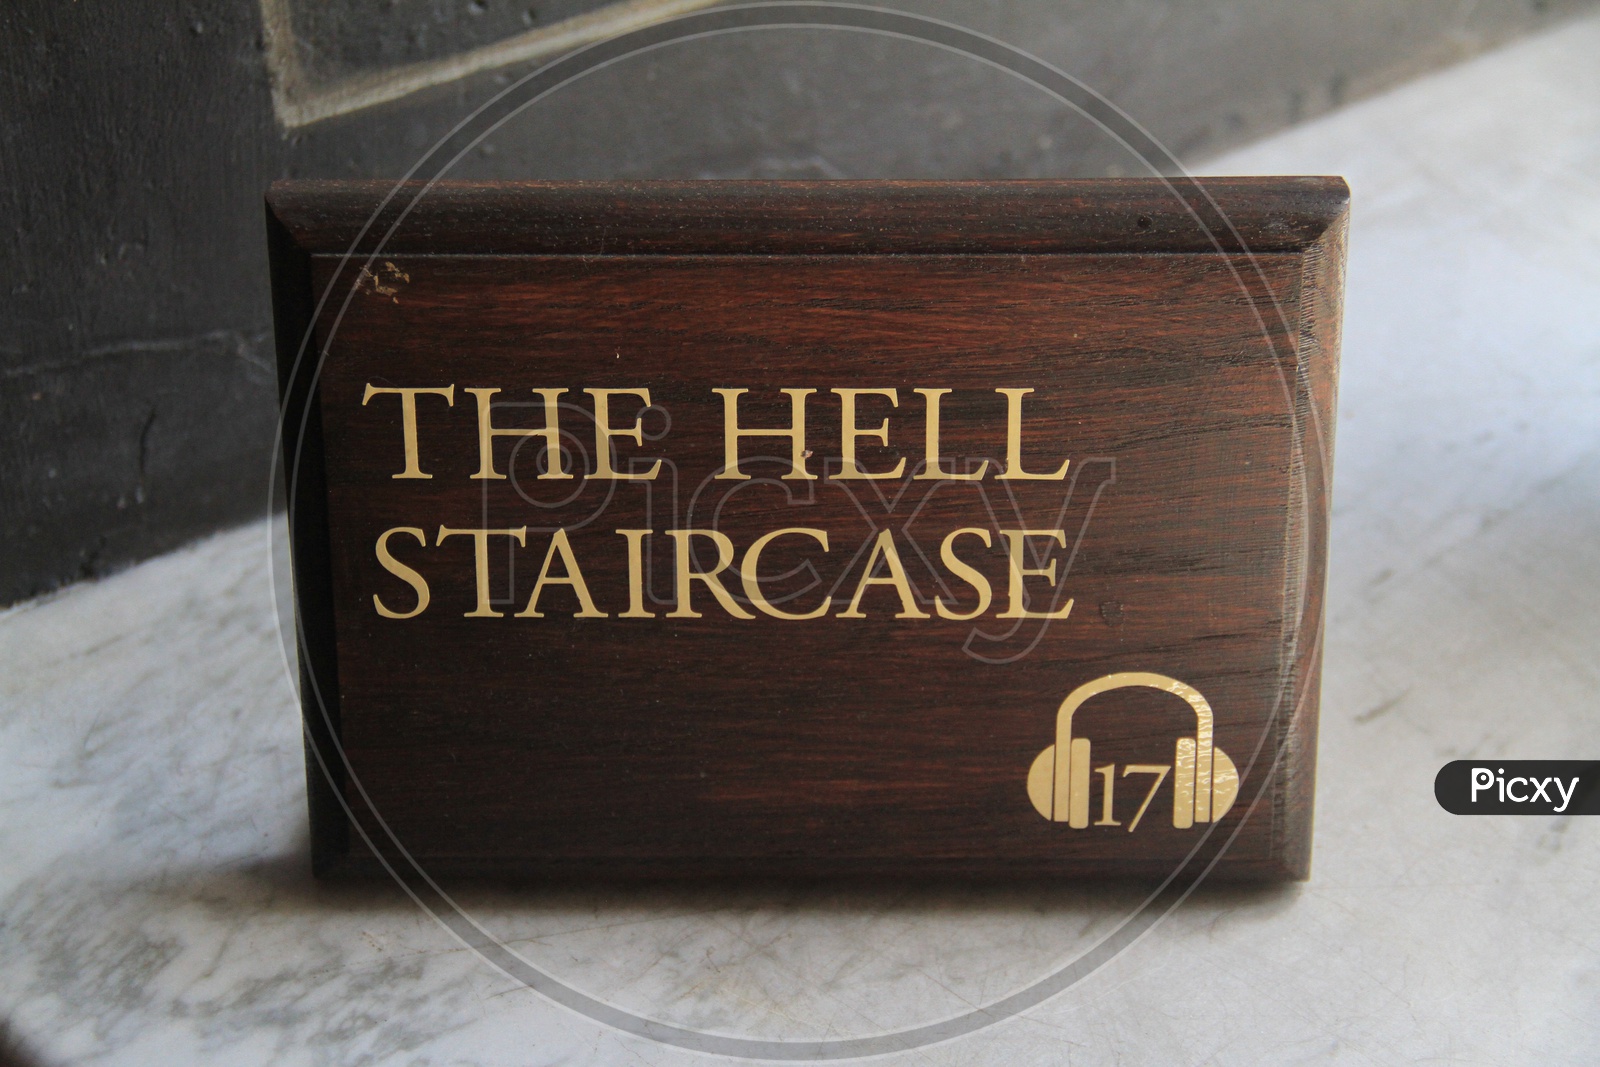 The Hell Staircase